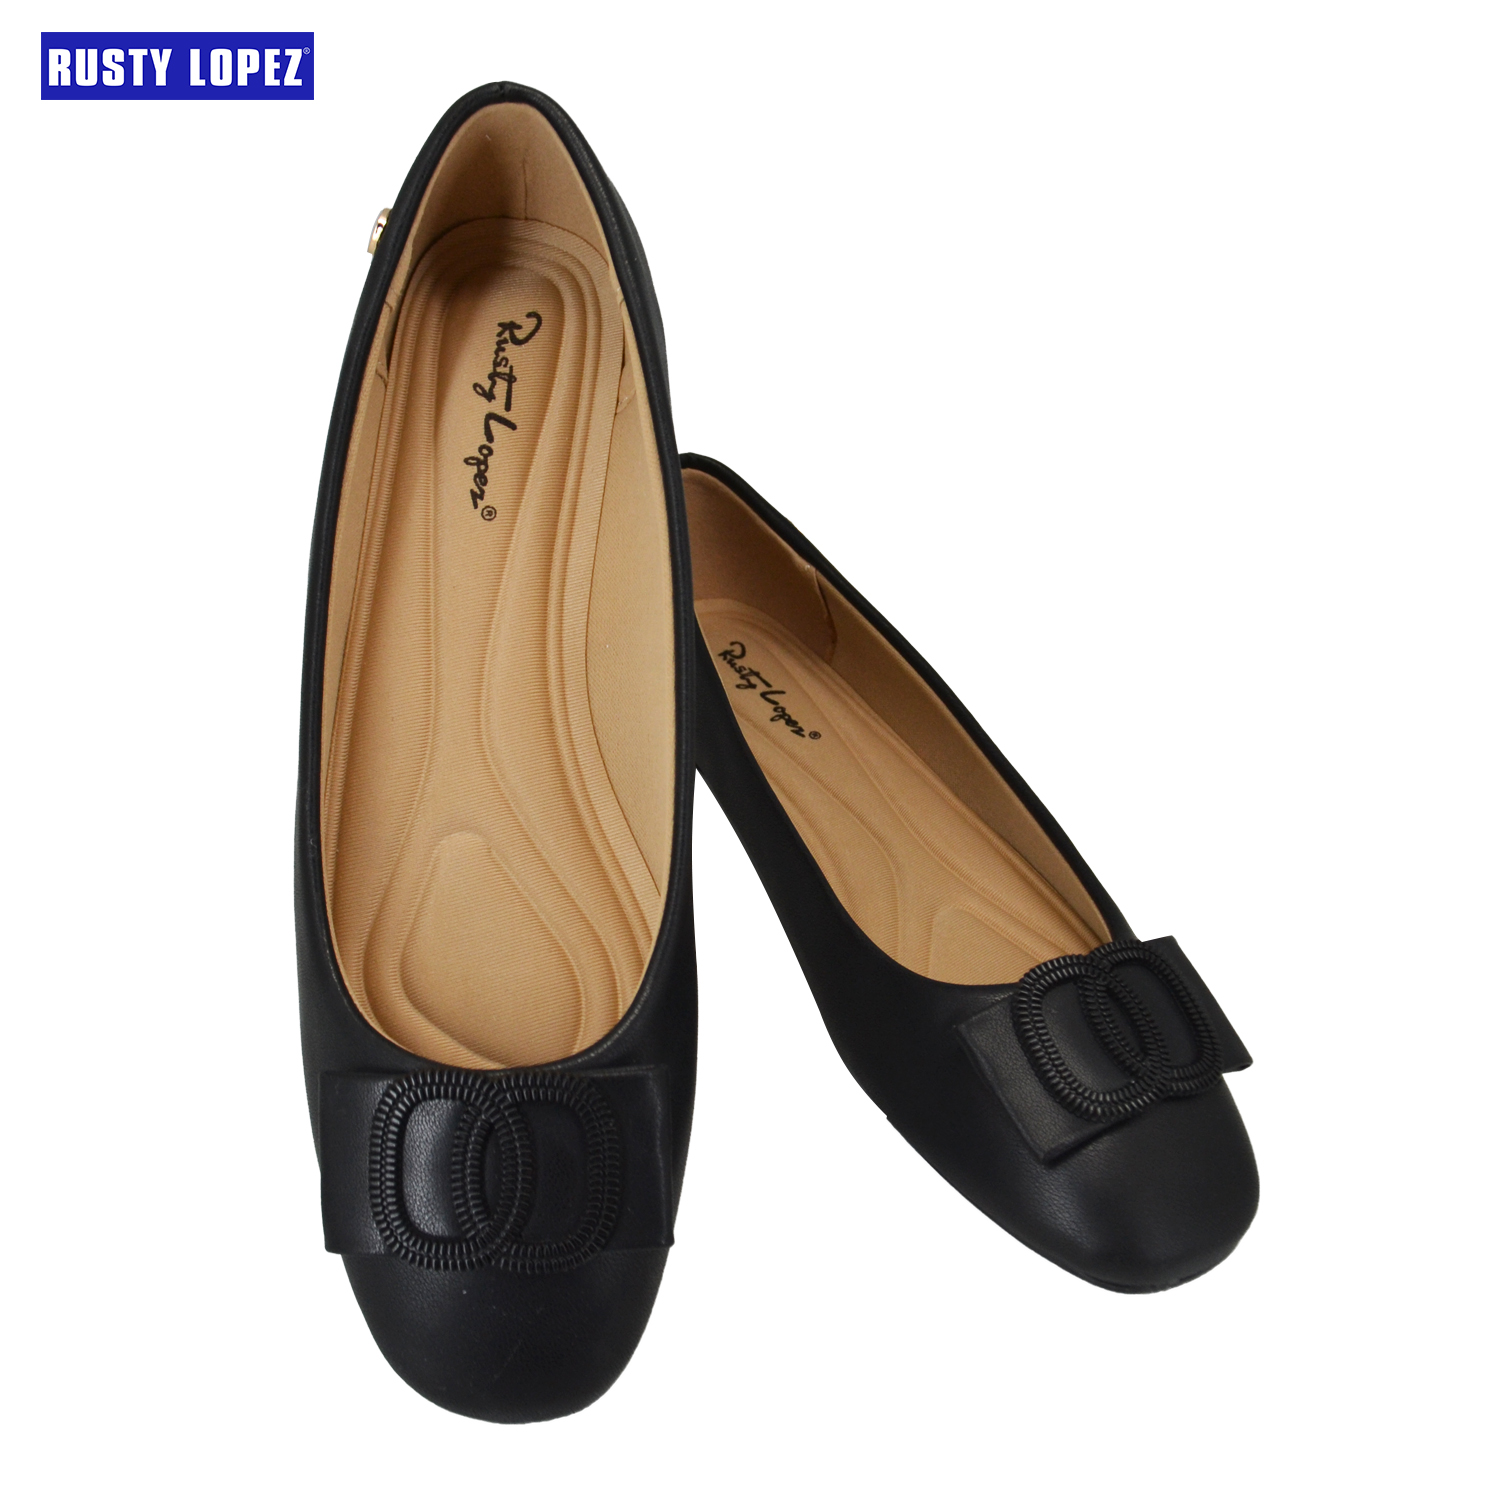 Rusty Lopez Women Loafers Shoes – LINA